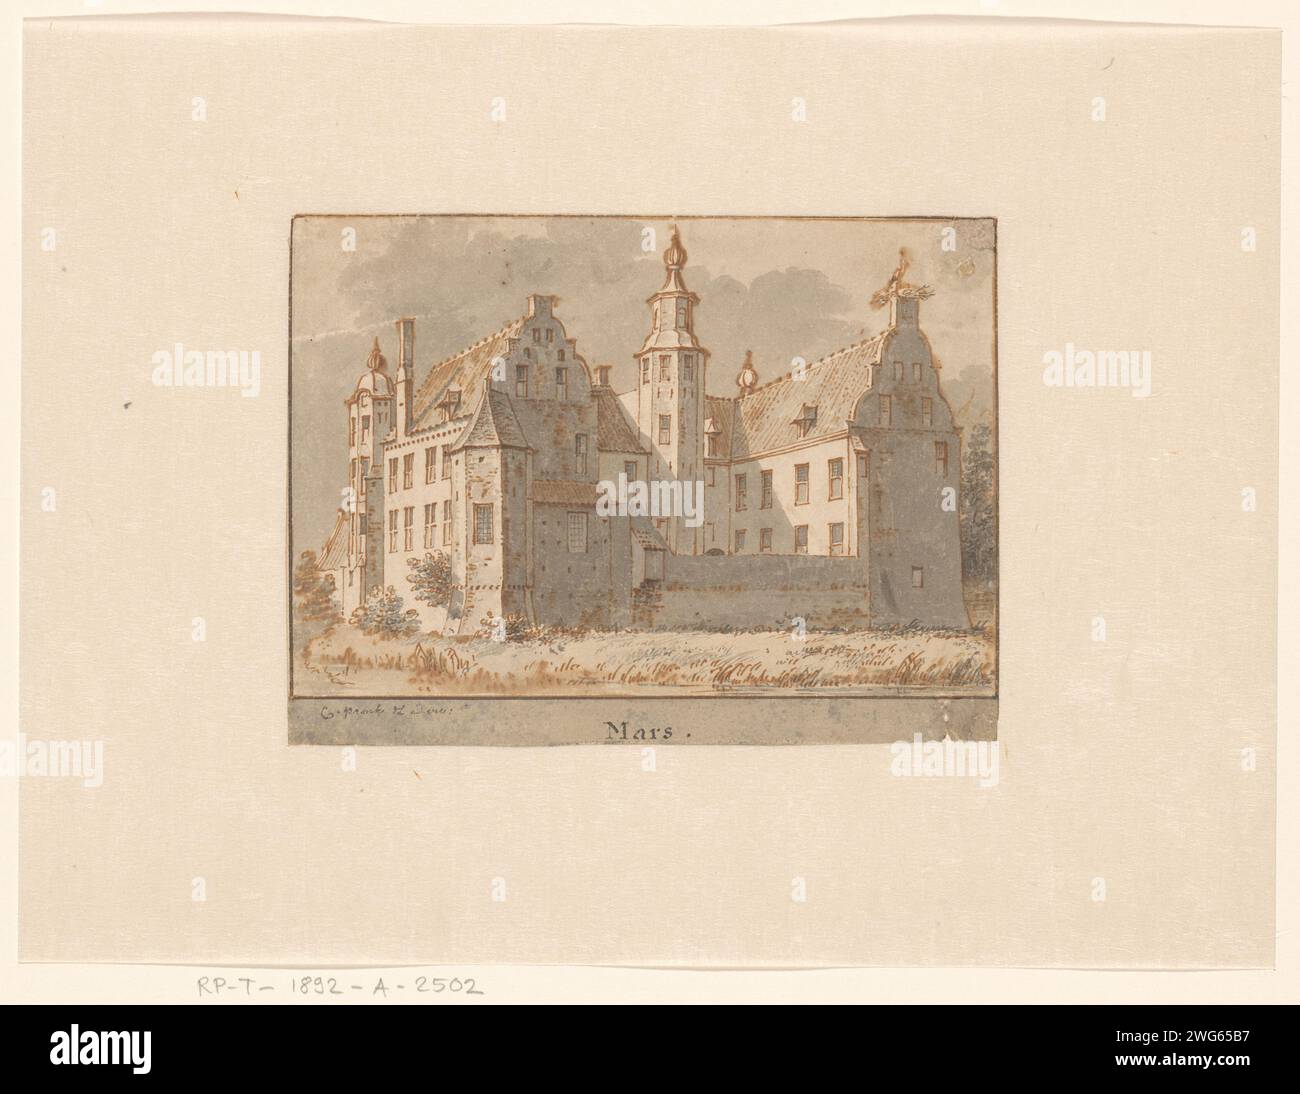 The ruin of the abbey in Rijnsburg, Hendrik Spilman, 1733 - 1784 drawing   paper. ink pen / brush parts of church exterior and annexes Rijnsburg Stock Photo